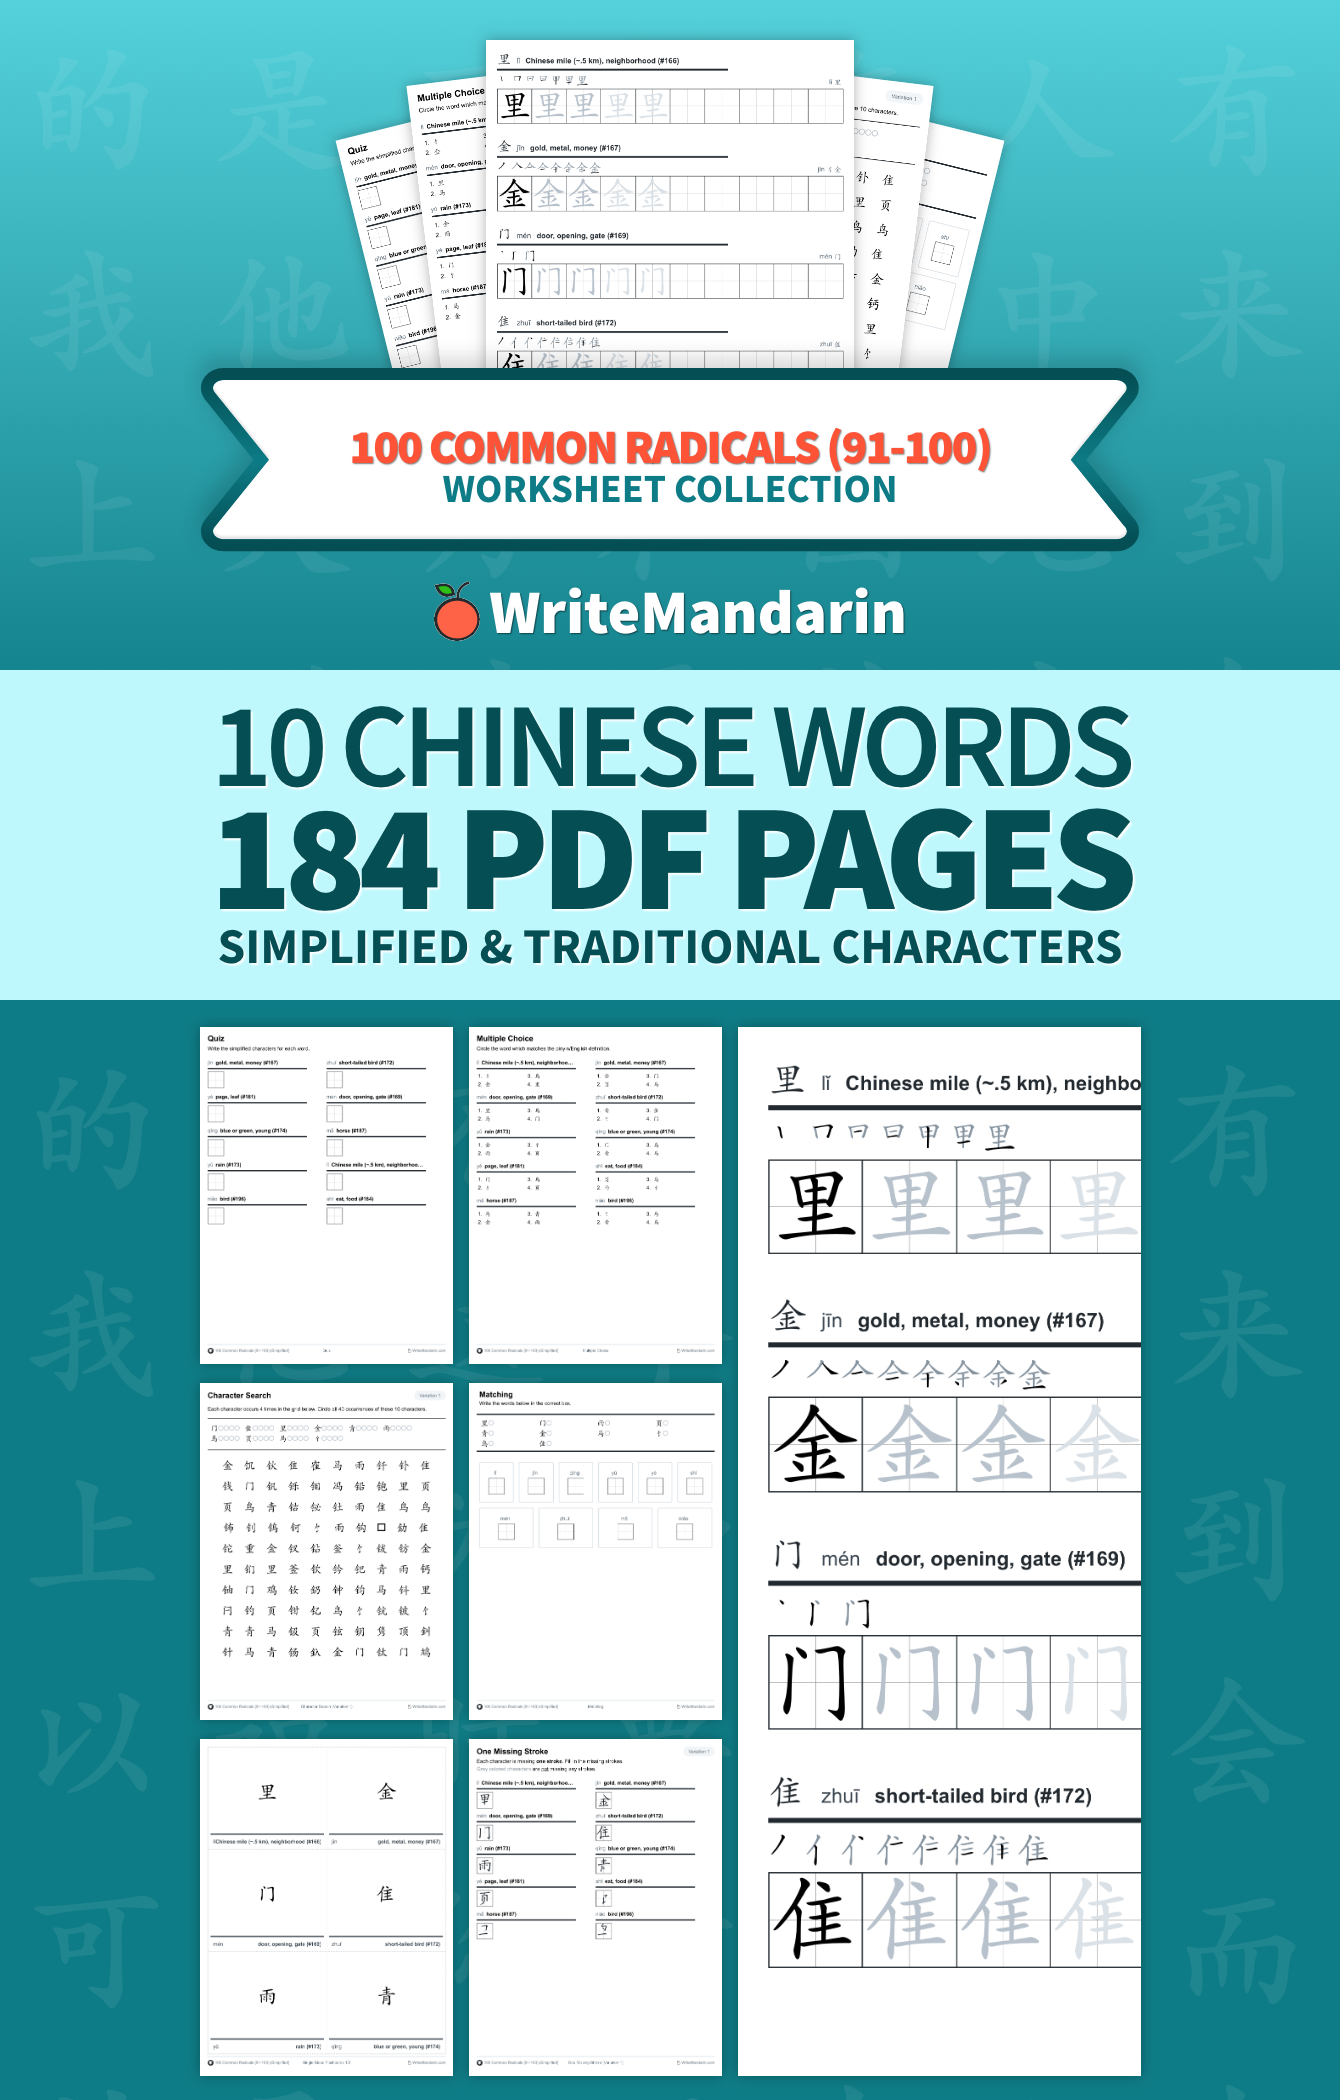 Preview image of 100 Common Radicals (91-100) worksheet collection